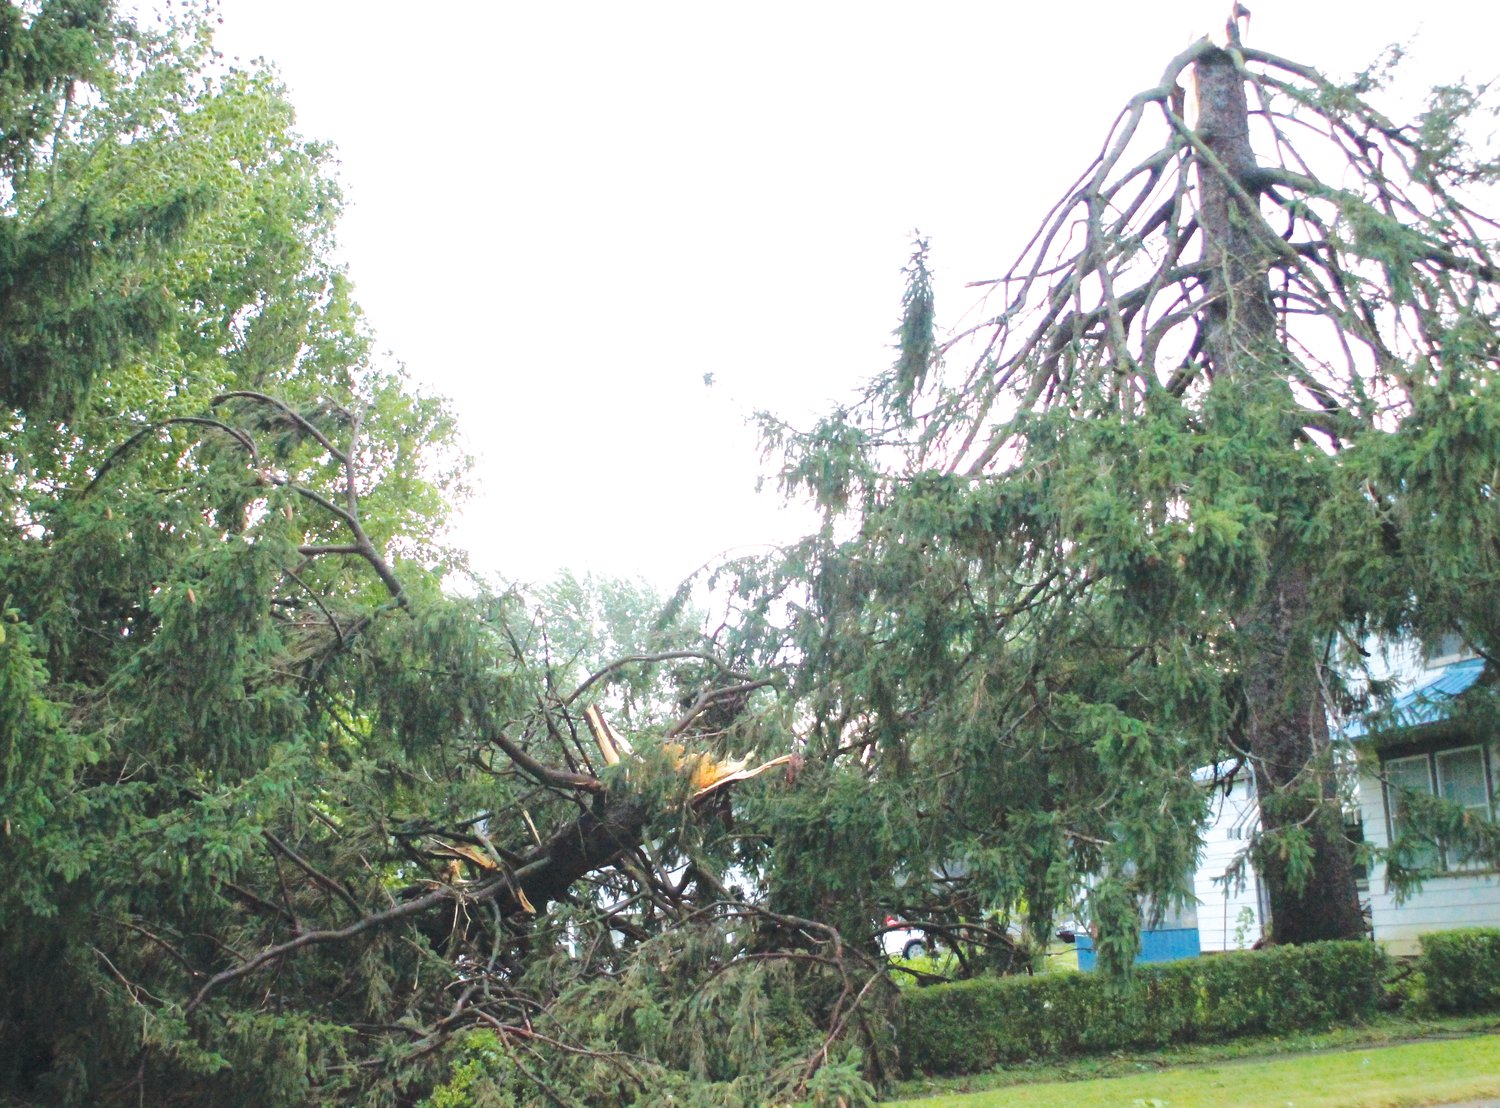 A large evergreen was snapped in half by strong winds Monday on B Ave. in Kalona.